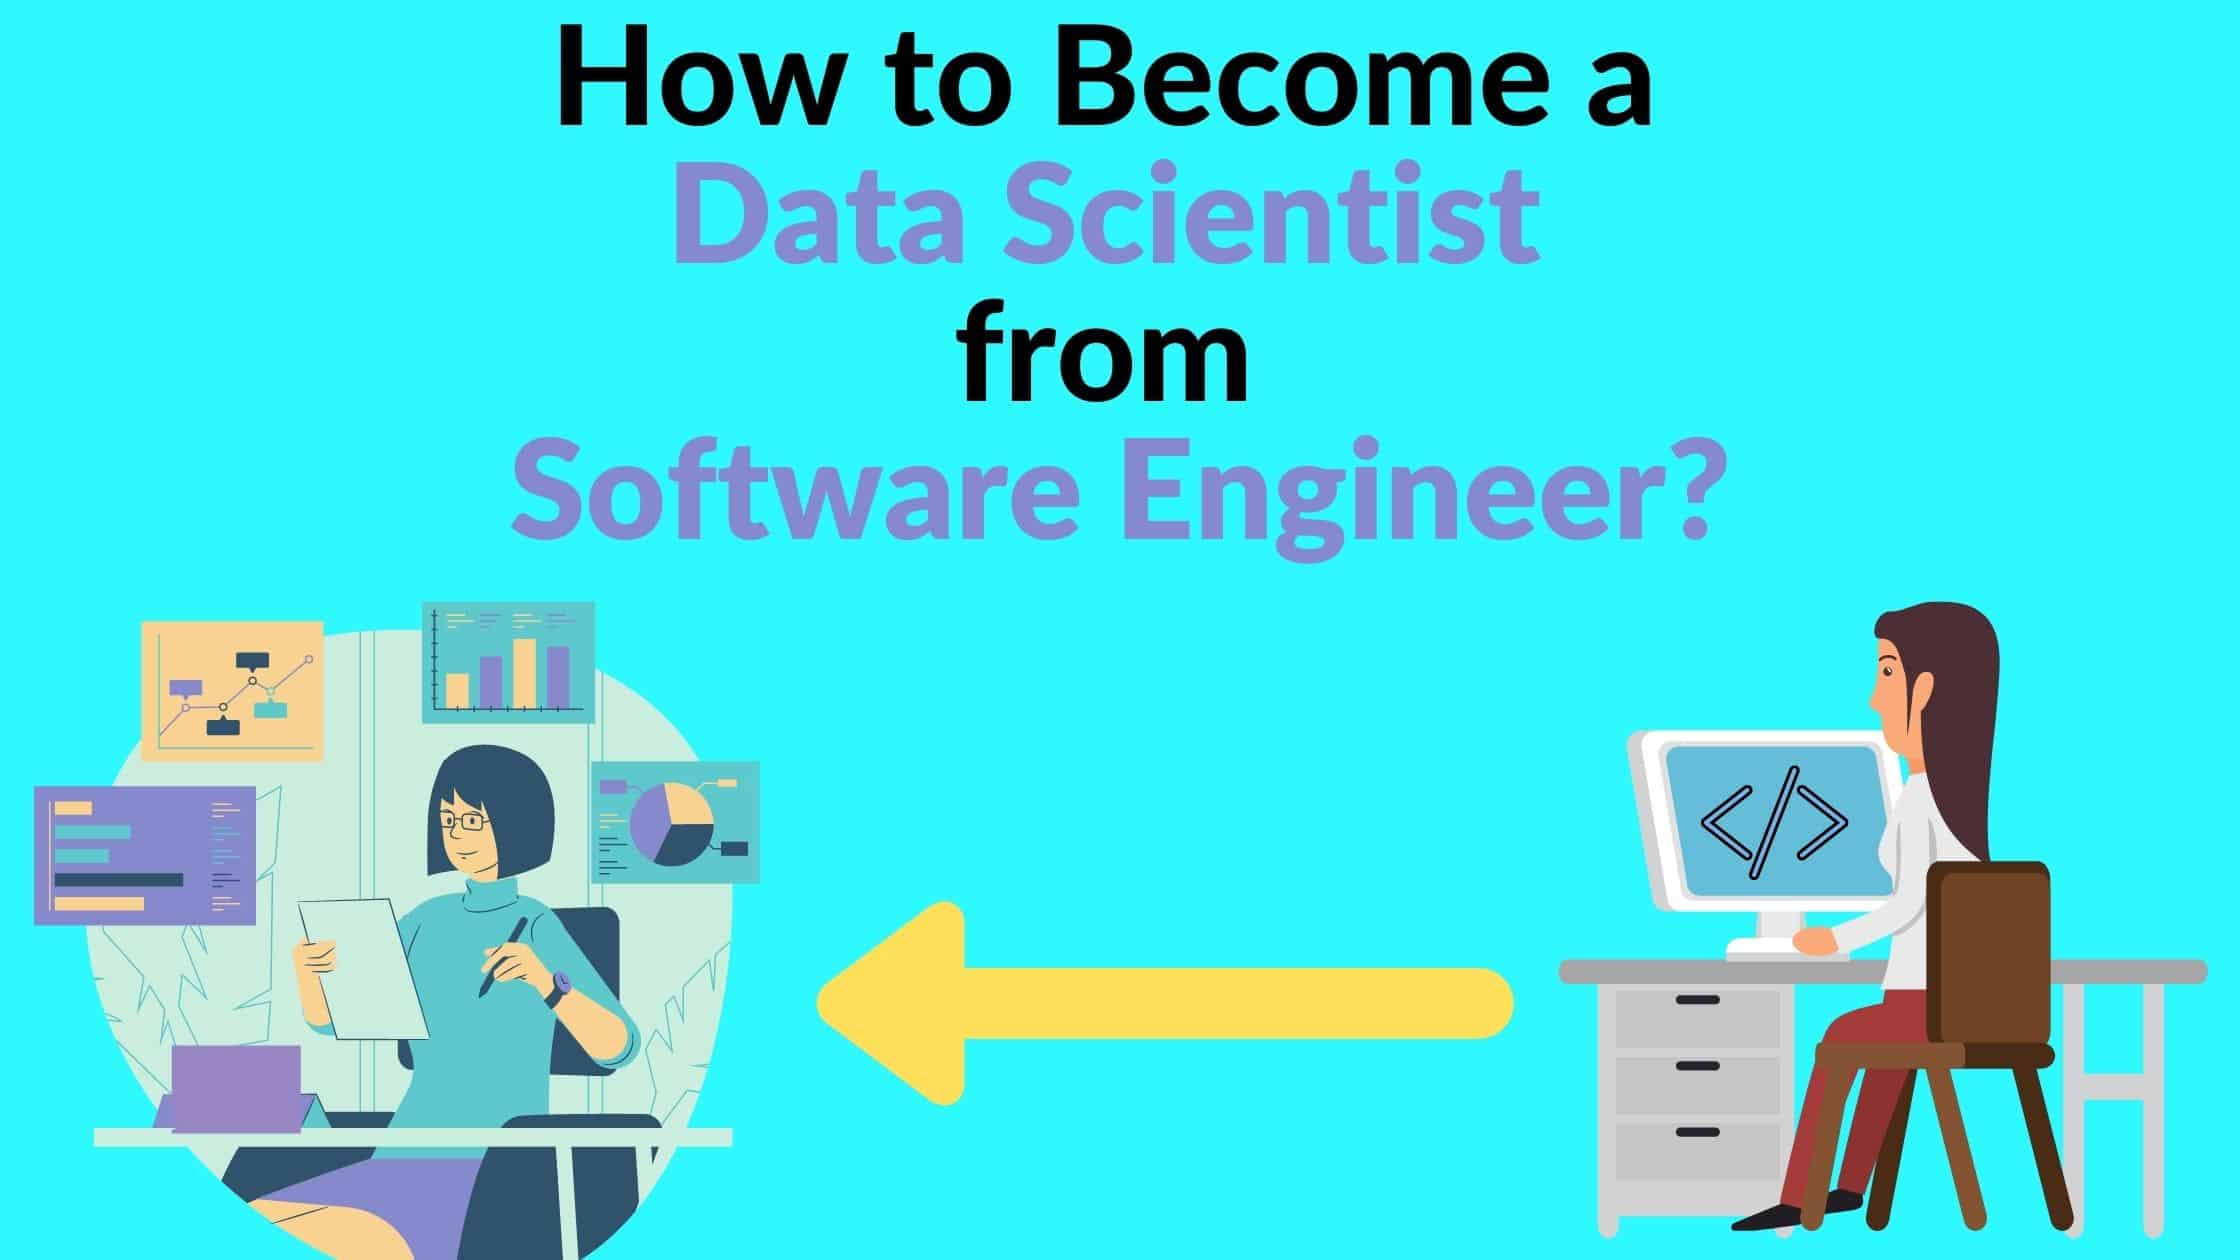 How to a Data Scientist from Software Engineer in 2021?